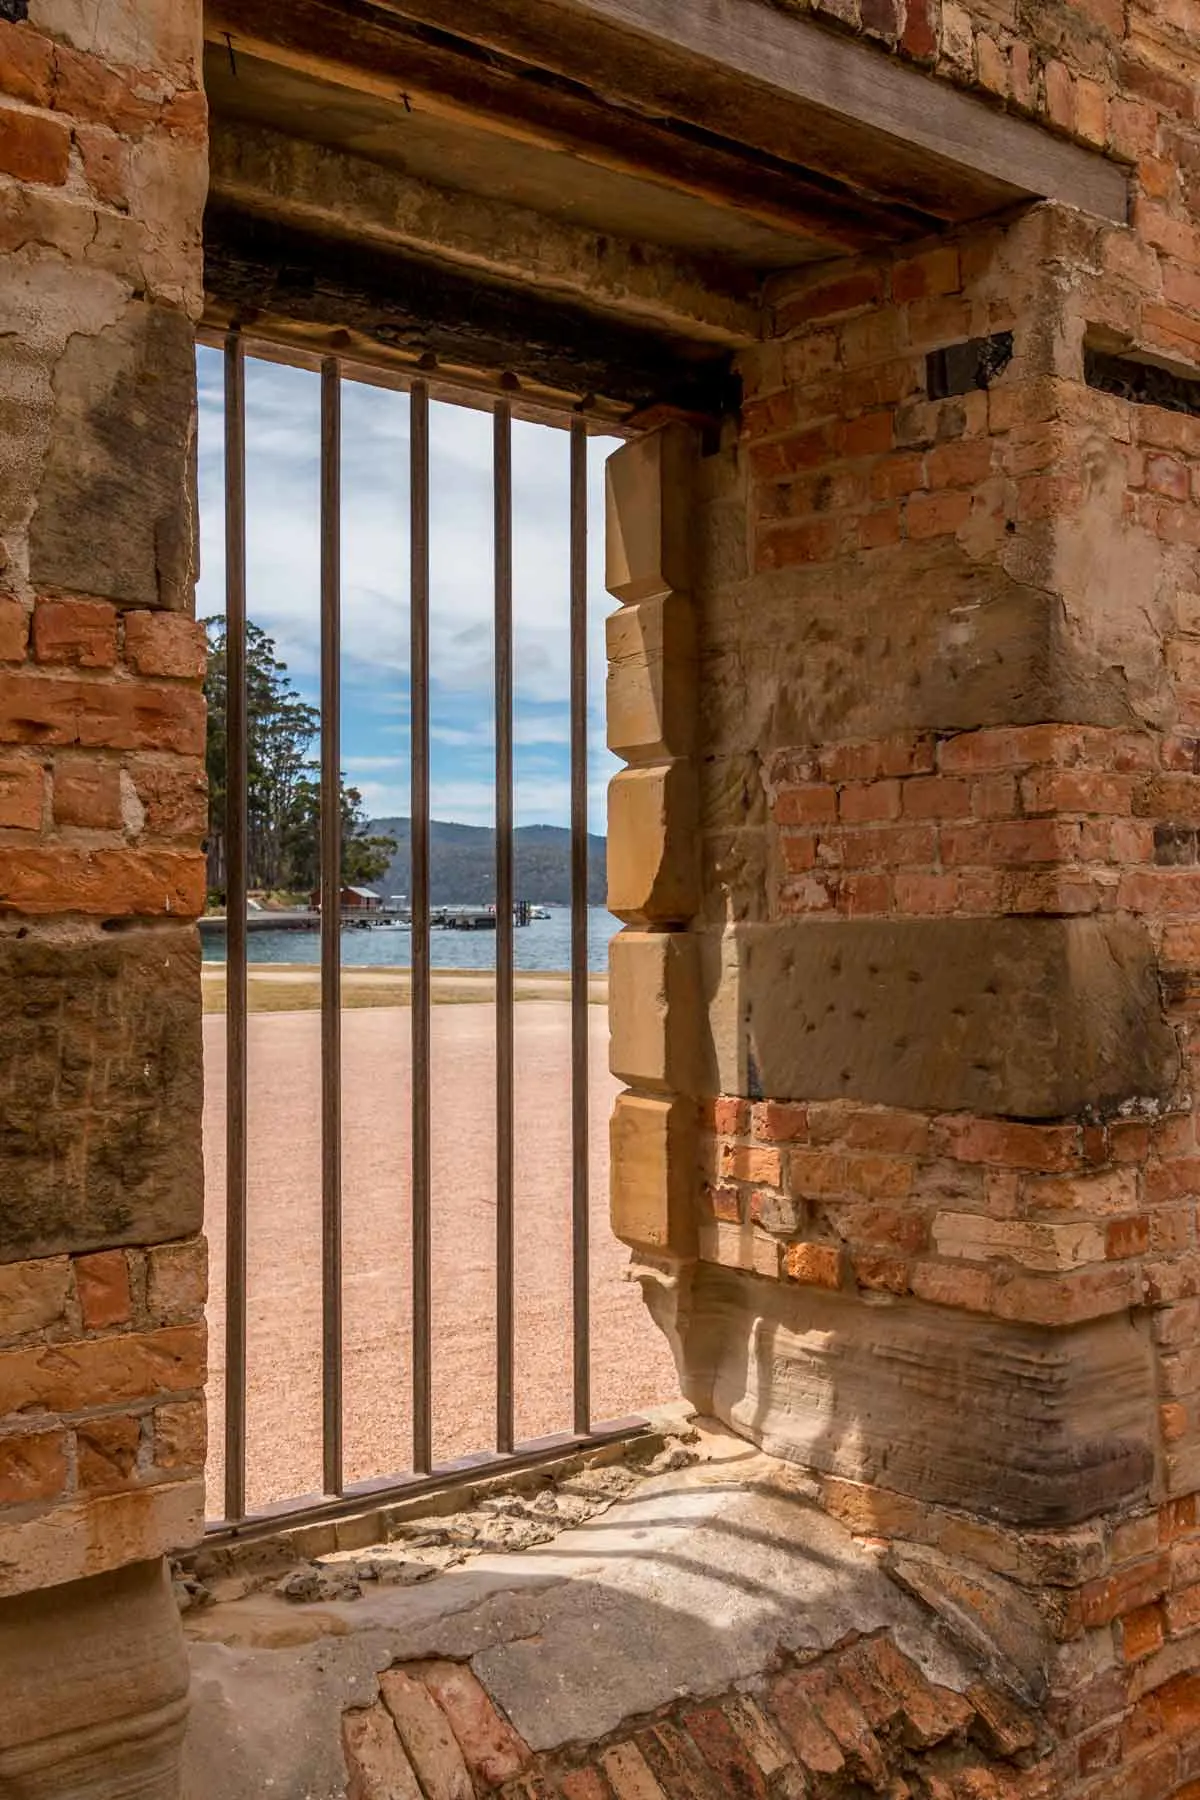 Looking though cell bars at Port Arthur